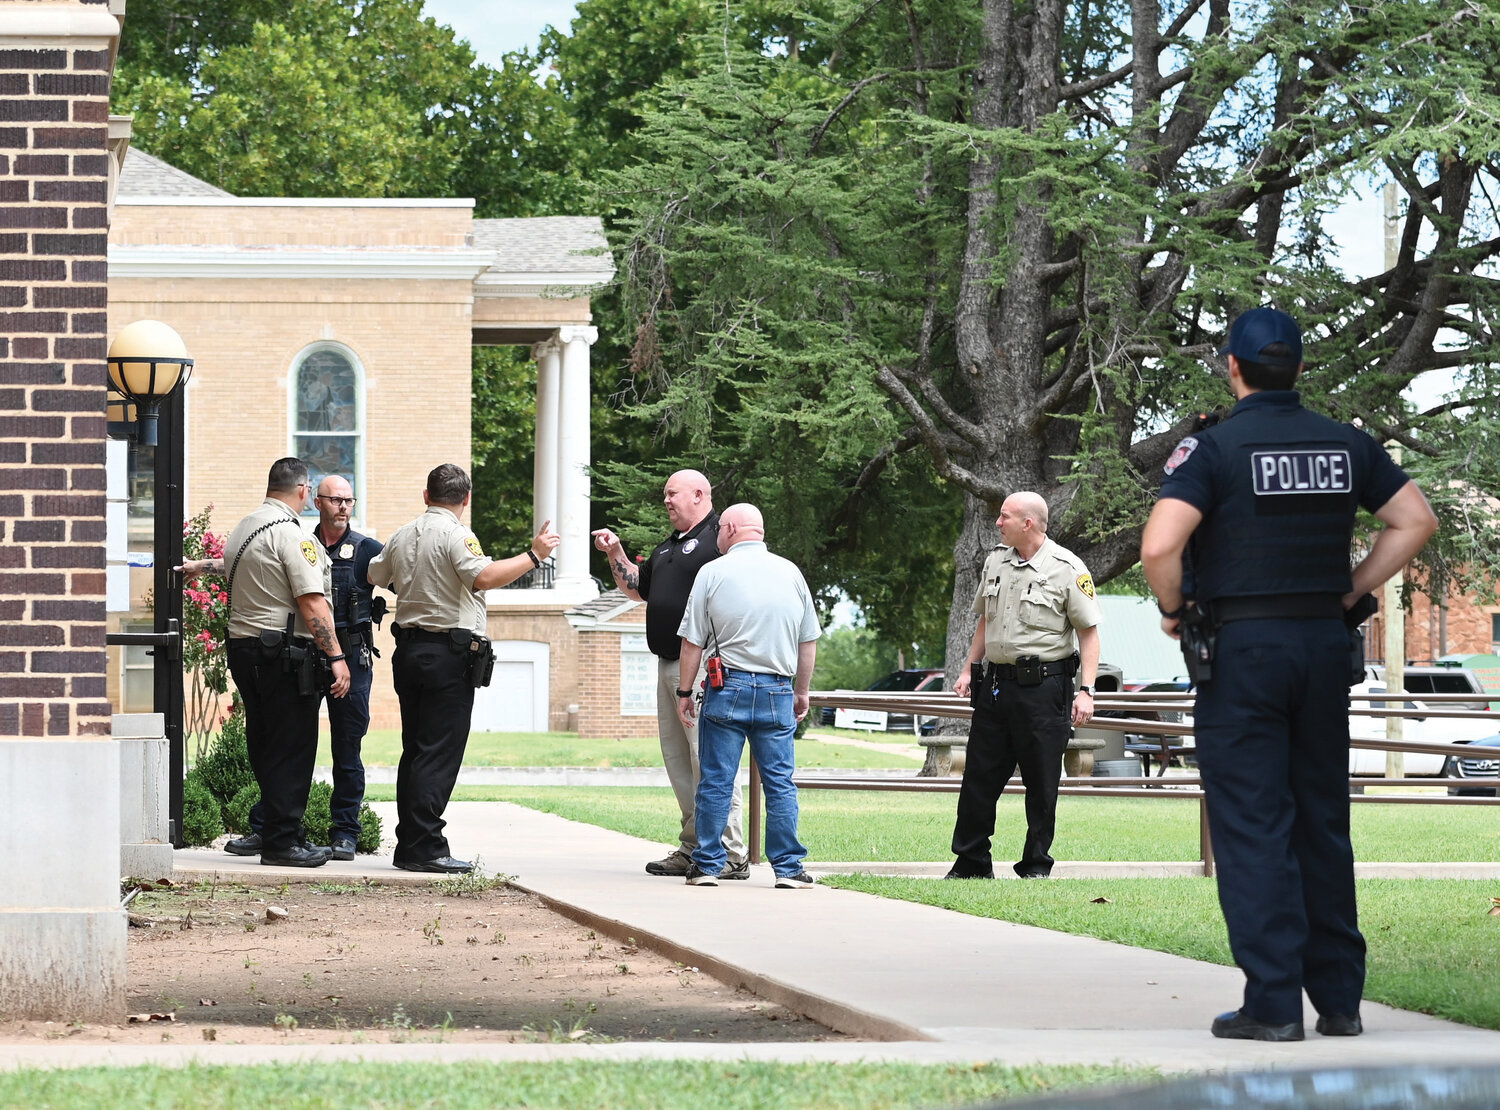 The McClain County Courthouse was evacuated Monday after a bomb threat was called into Court Clerk’s office. After a search did not uncover any threats the all-clear was given. At least five law enforcement agencies including Homeland Security, the OSBI, the OHP, Purcell Police and the McClain County Sheriff’s Department were on the scene.